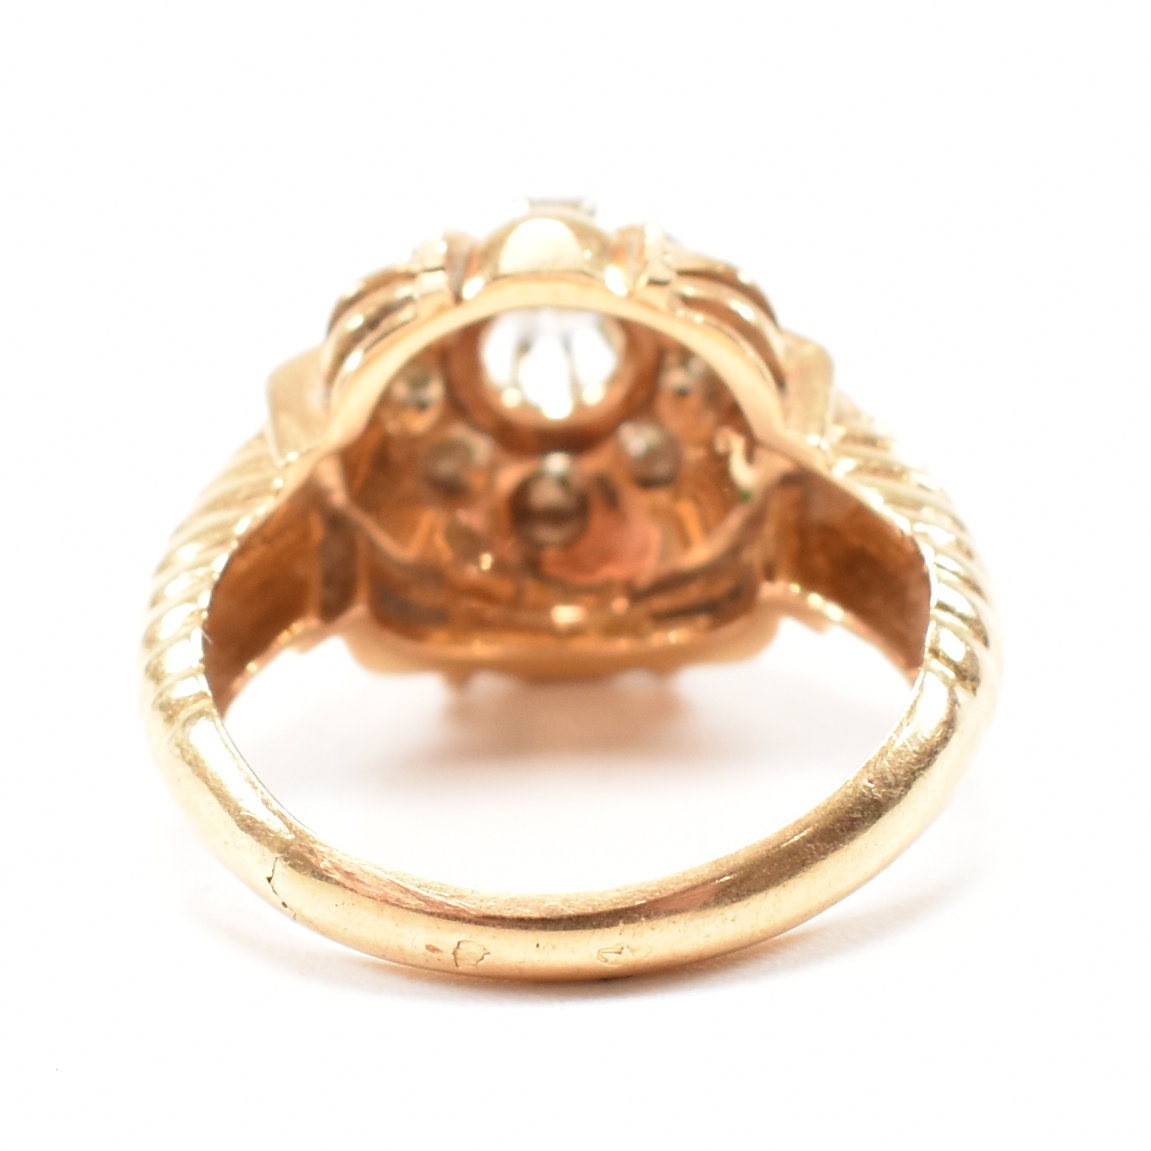 VINTAGE FRENCH DIAMOND CLUSTER RING - Image 5 of 6